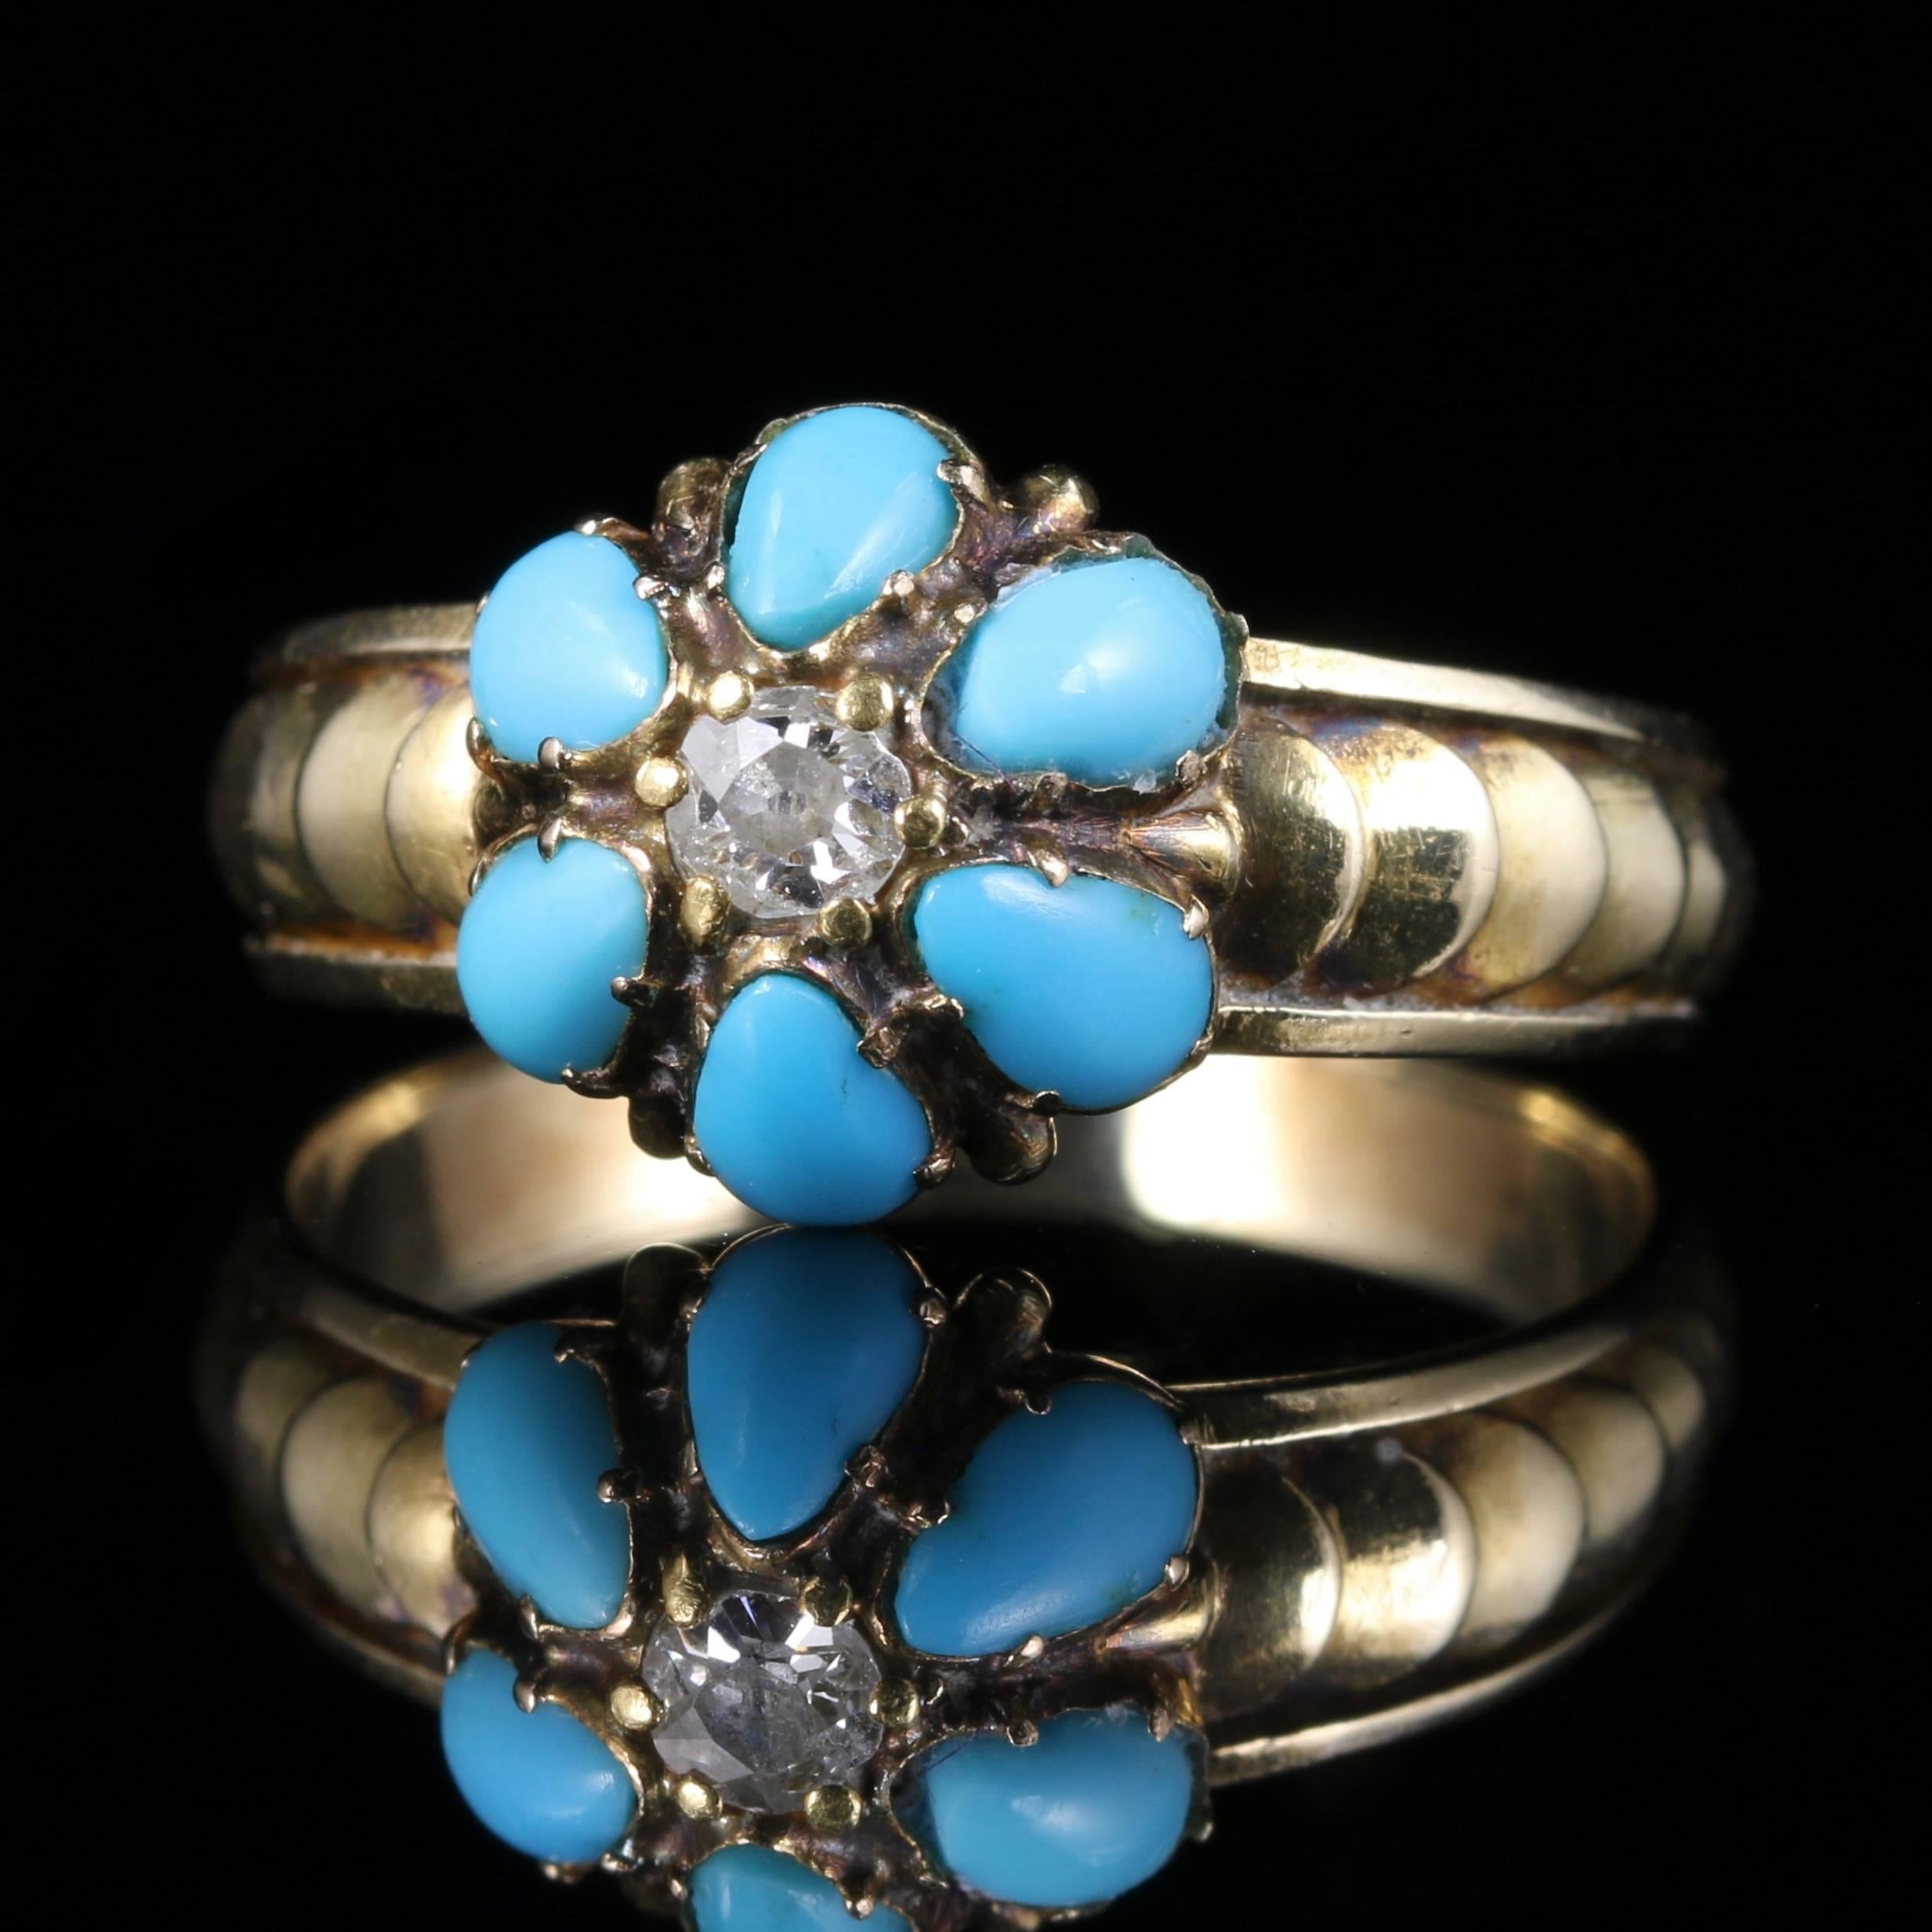 This genuine Georgian 18ct yellow gold ring is set with beautiful natural turquoises and a lovely central old cut diamond.

The turquoise stone has healing properties, it protects the wearer from negative energy and brings good fortune. Turquoise is